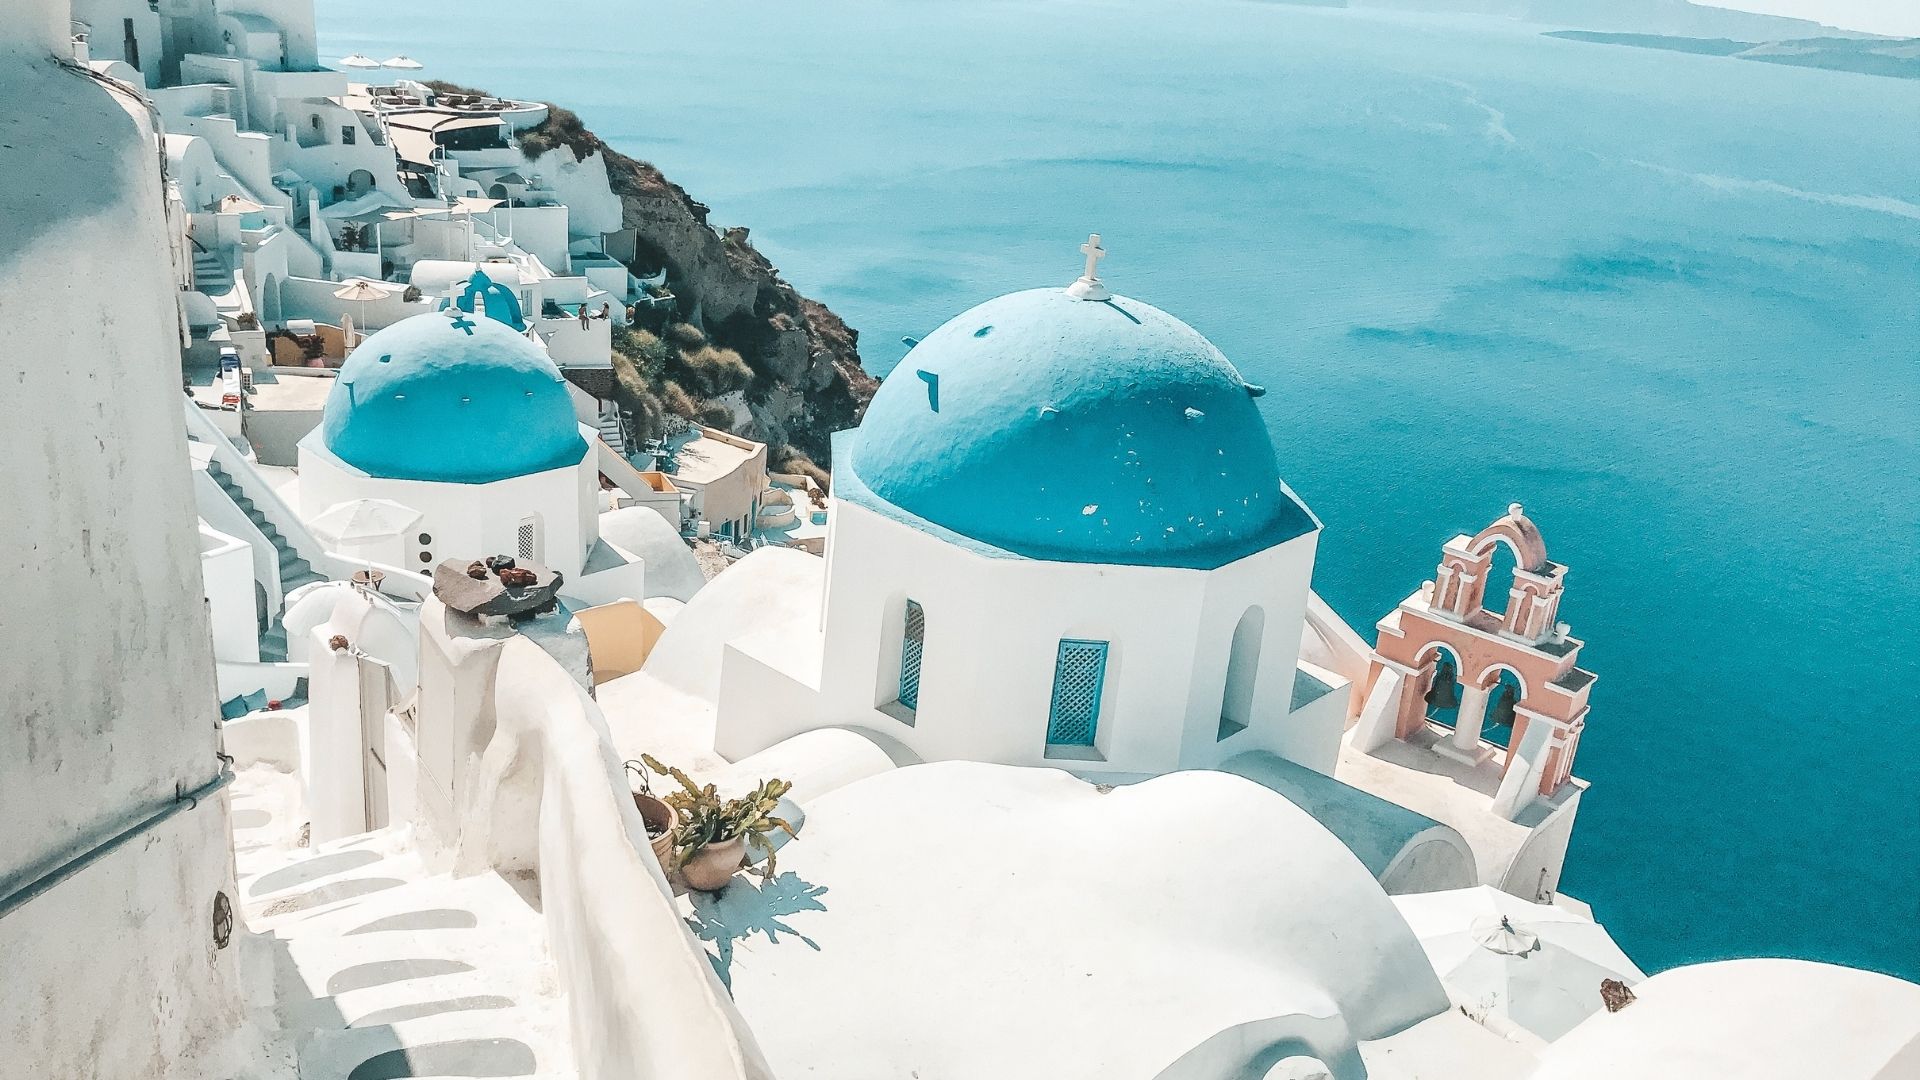 Where to find blue domes in Santorini